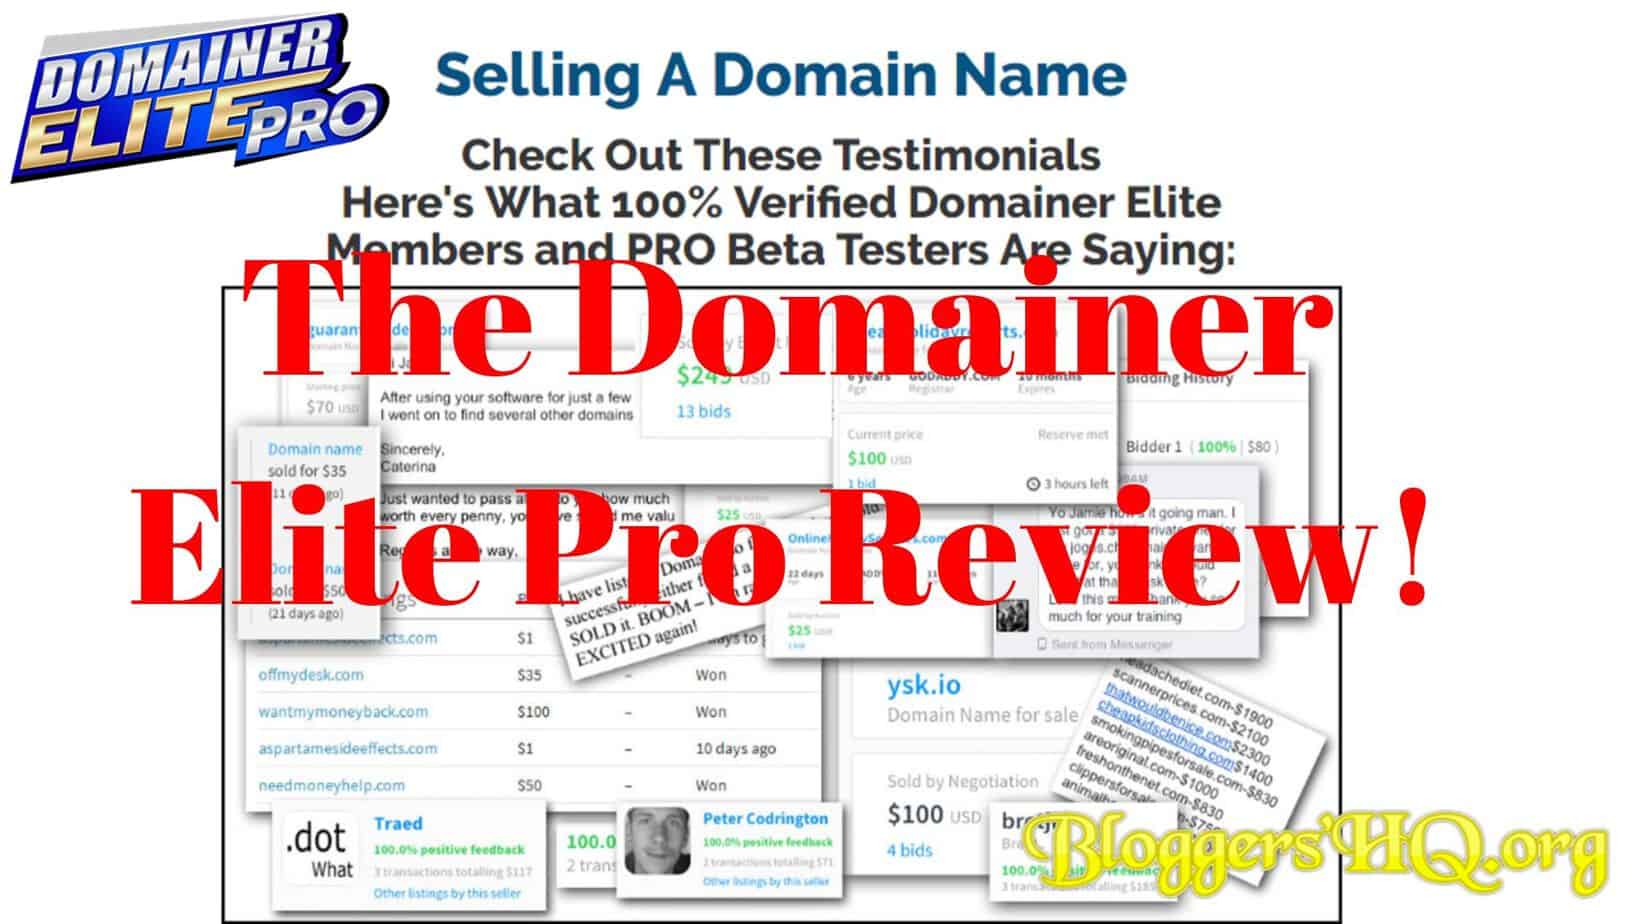 domainer elite pro nulled